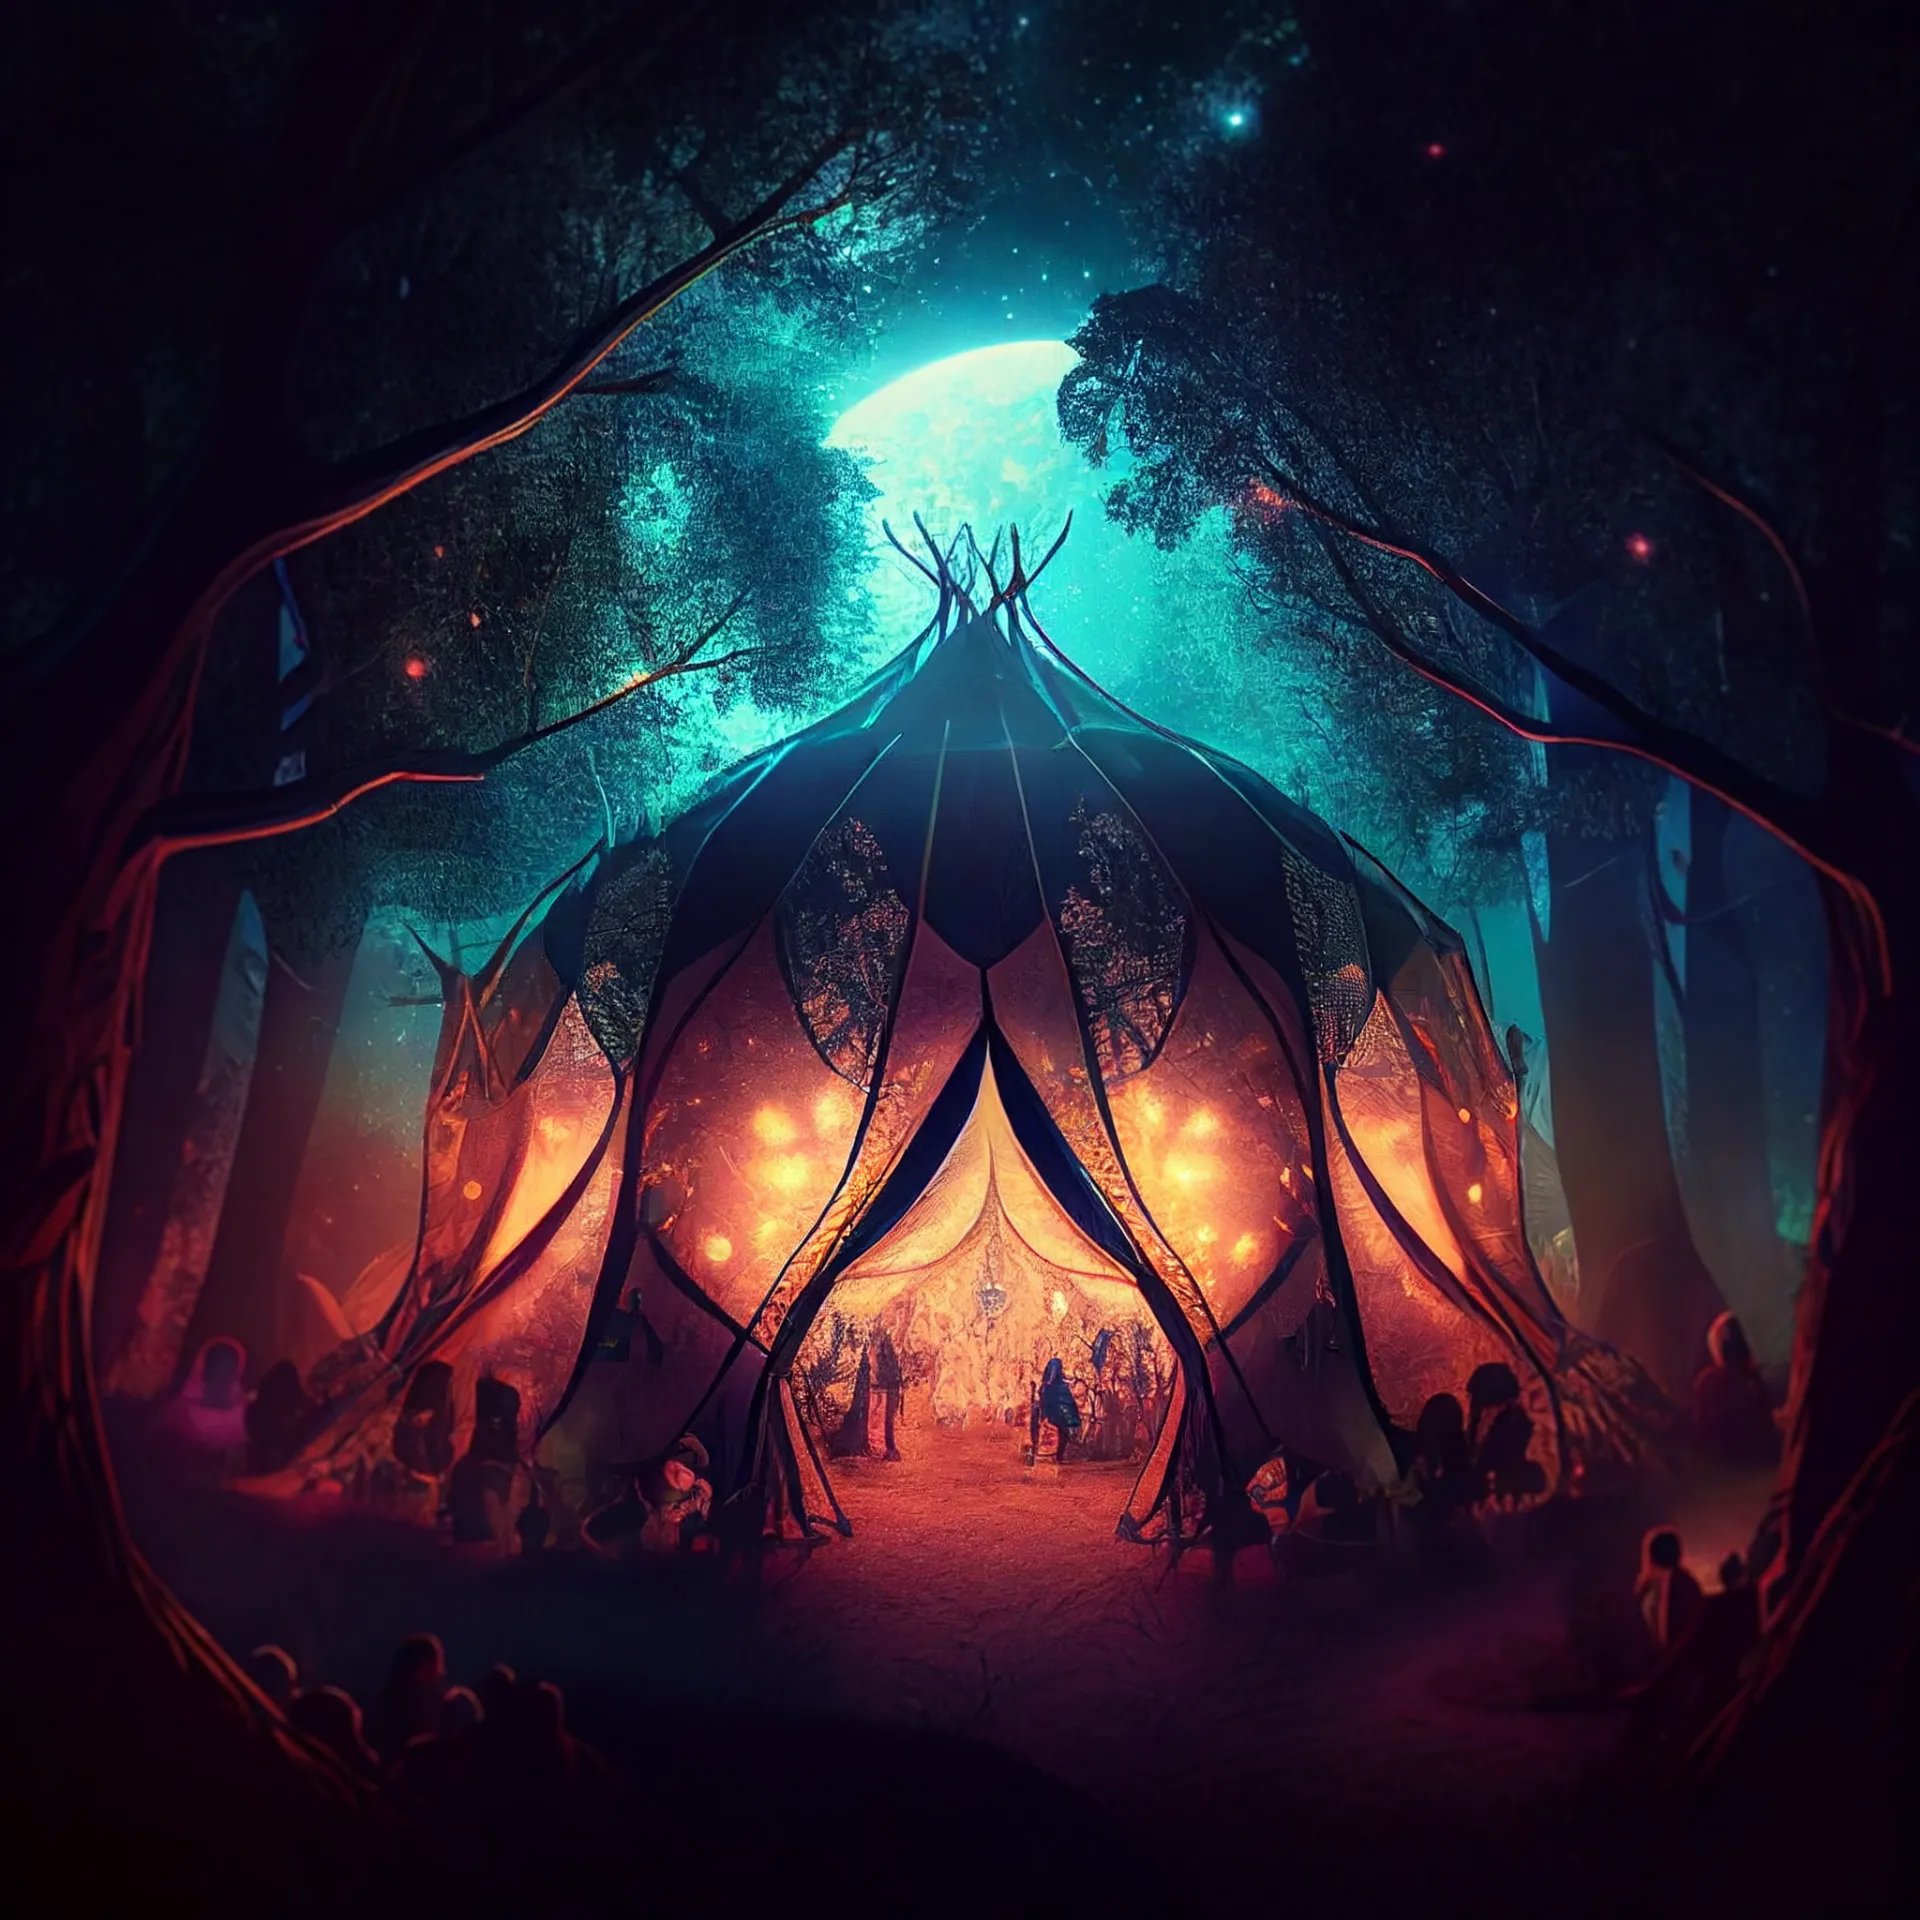 bliss-boogie-tent-night-forest1